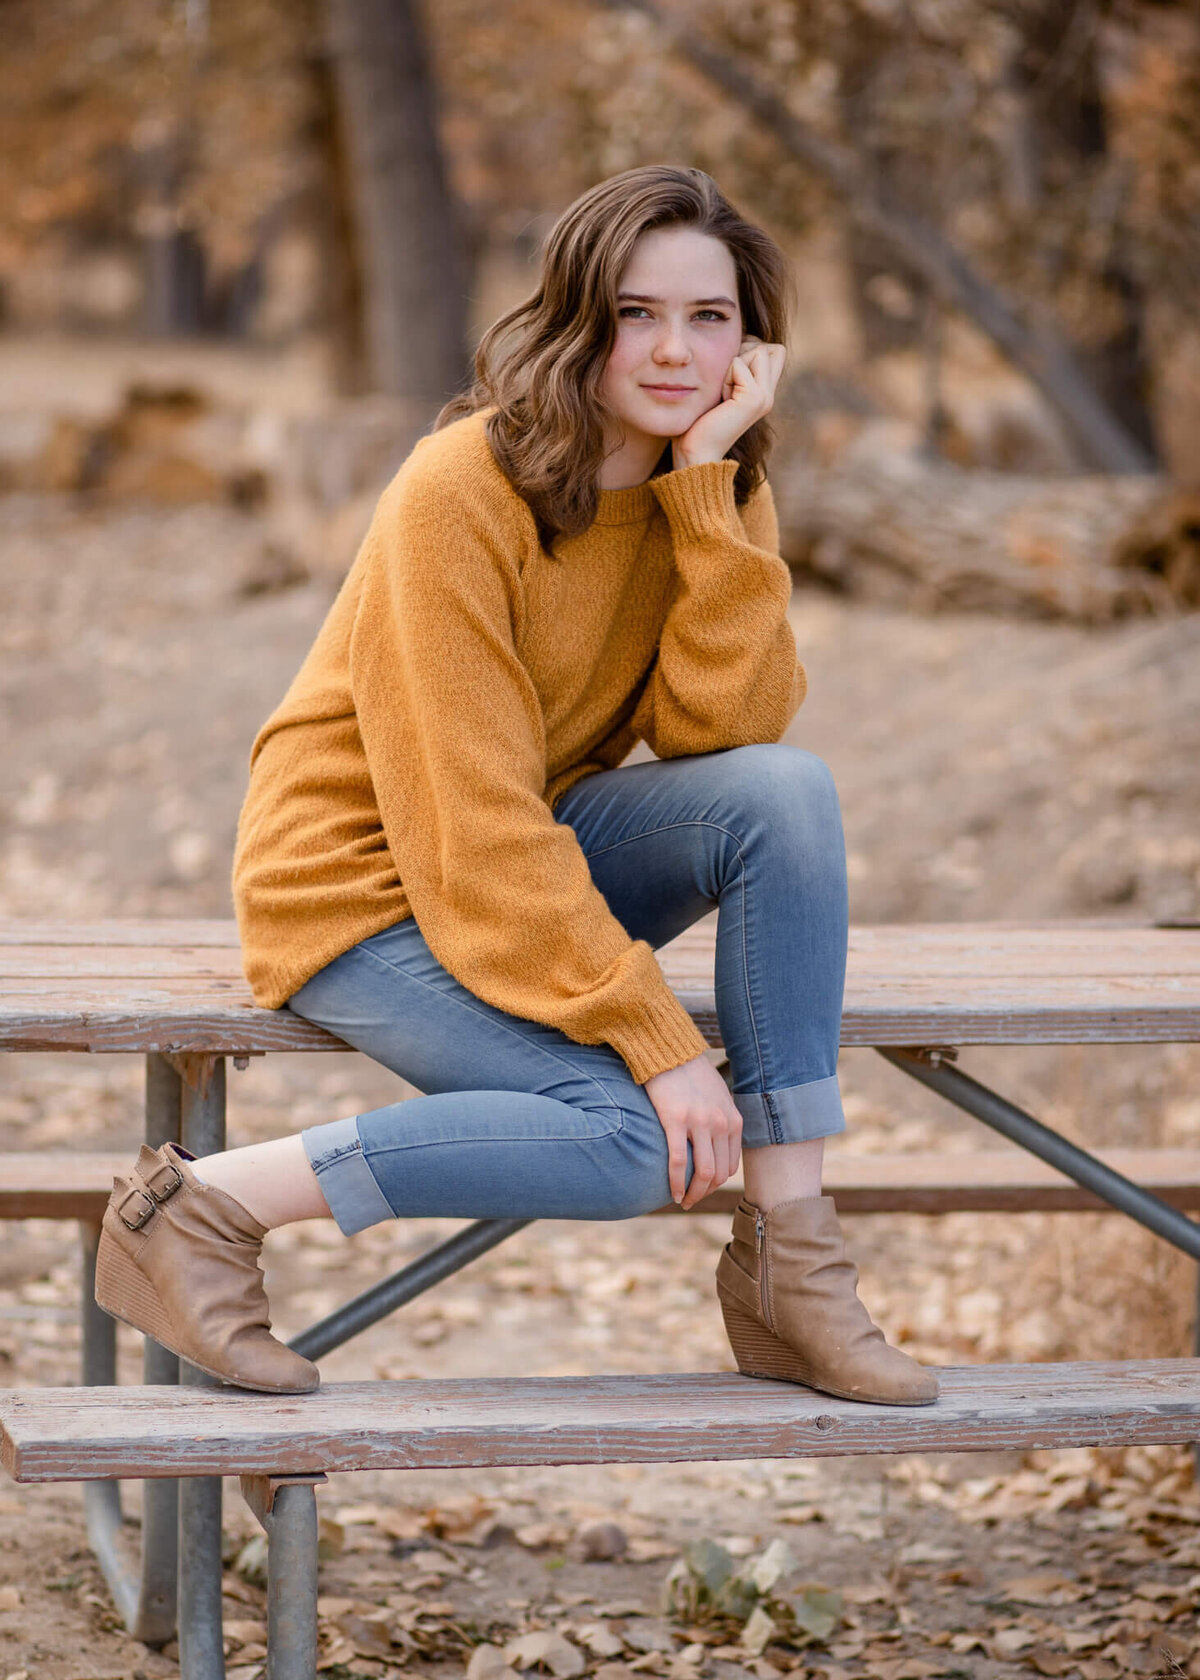 high school senior girl sitting on a picnic table wearing a yellow sweater and jeans